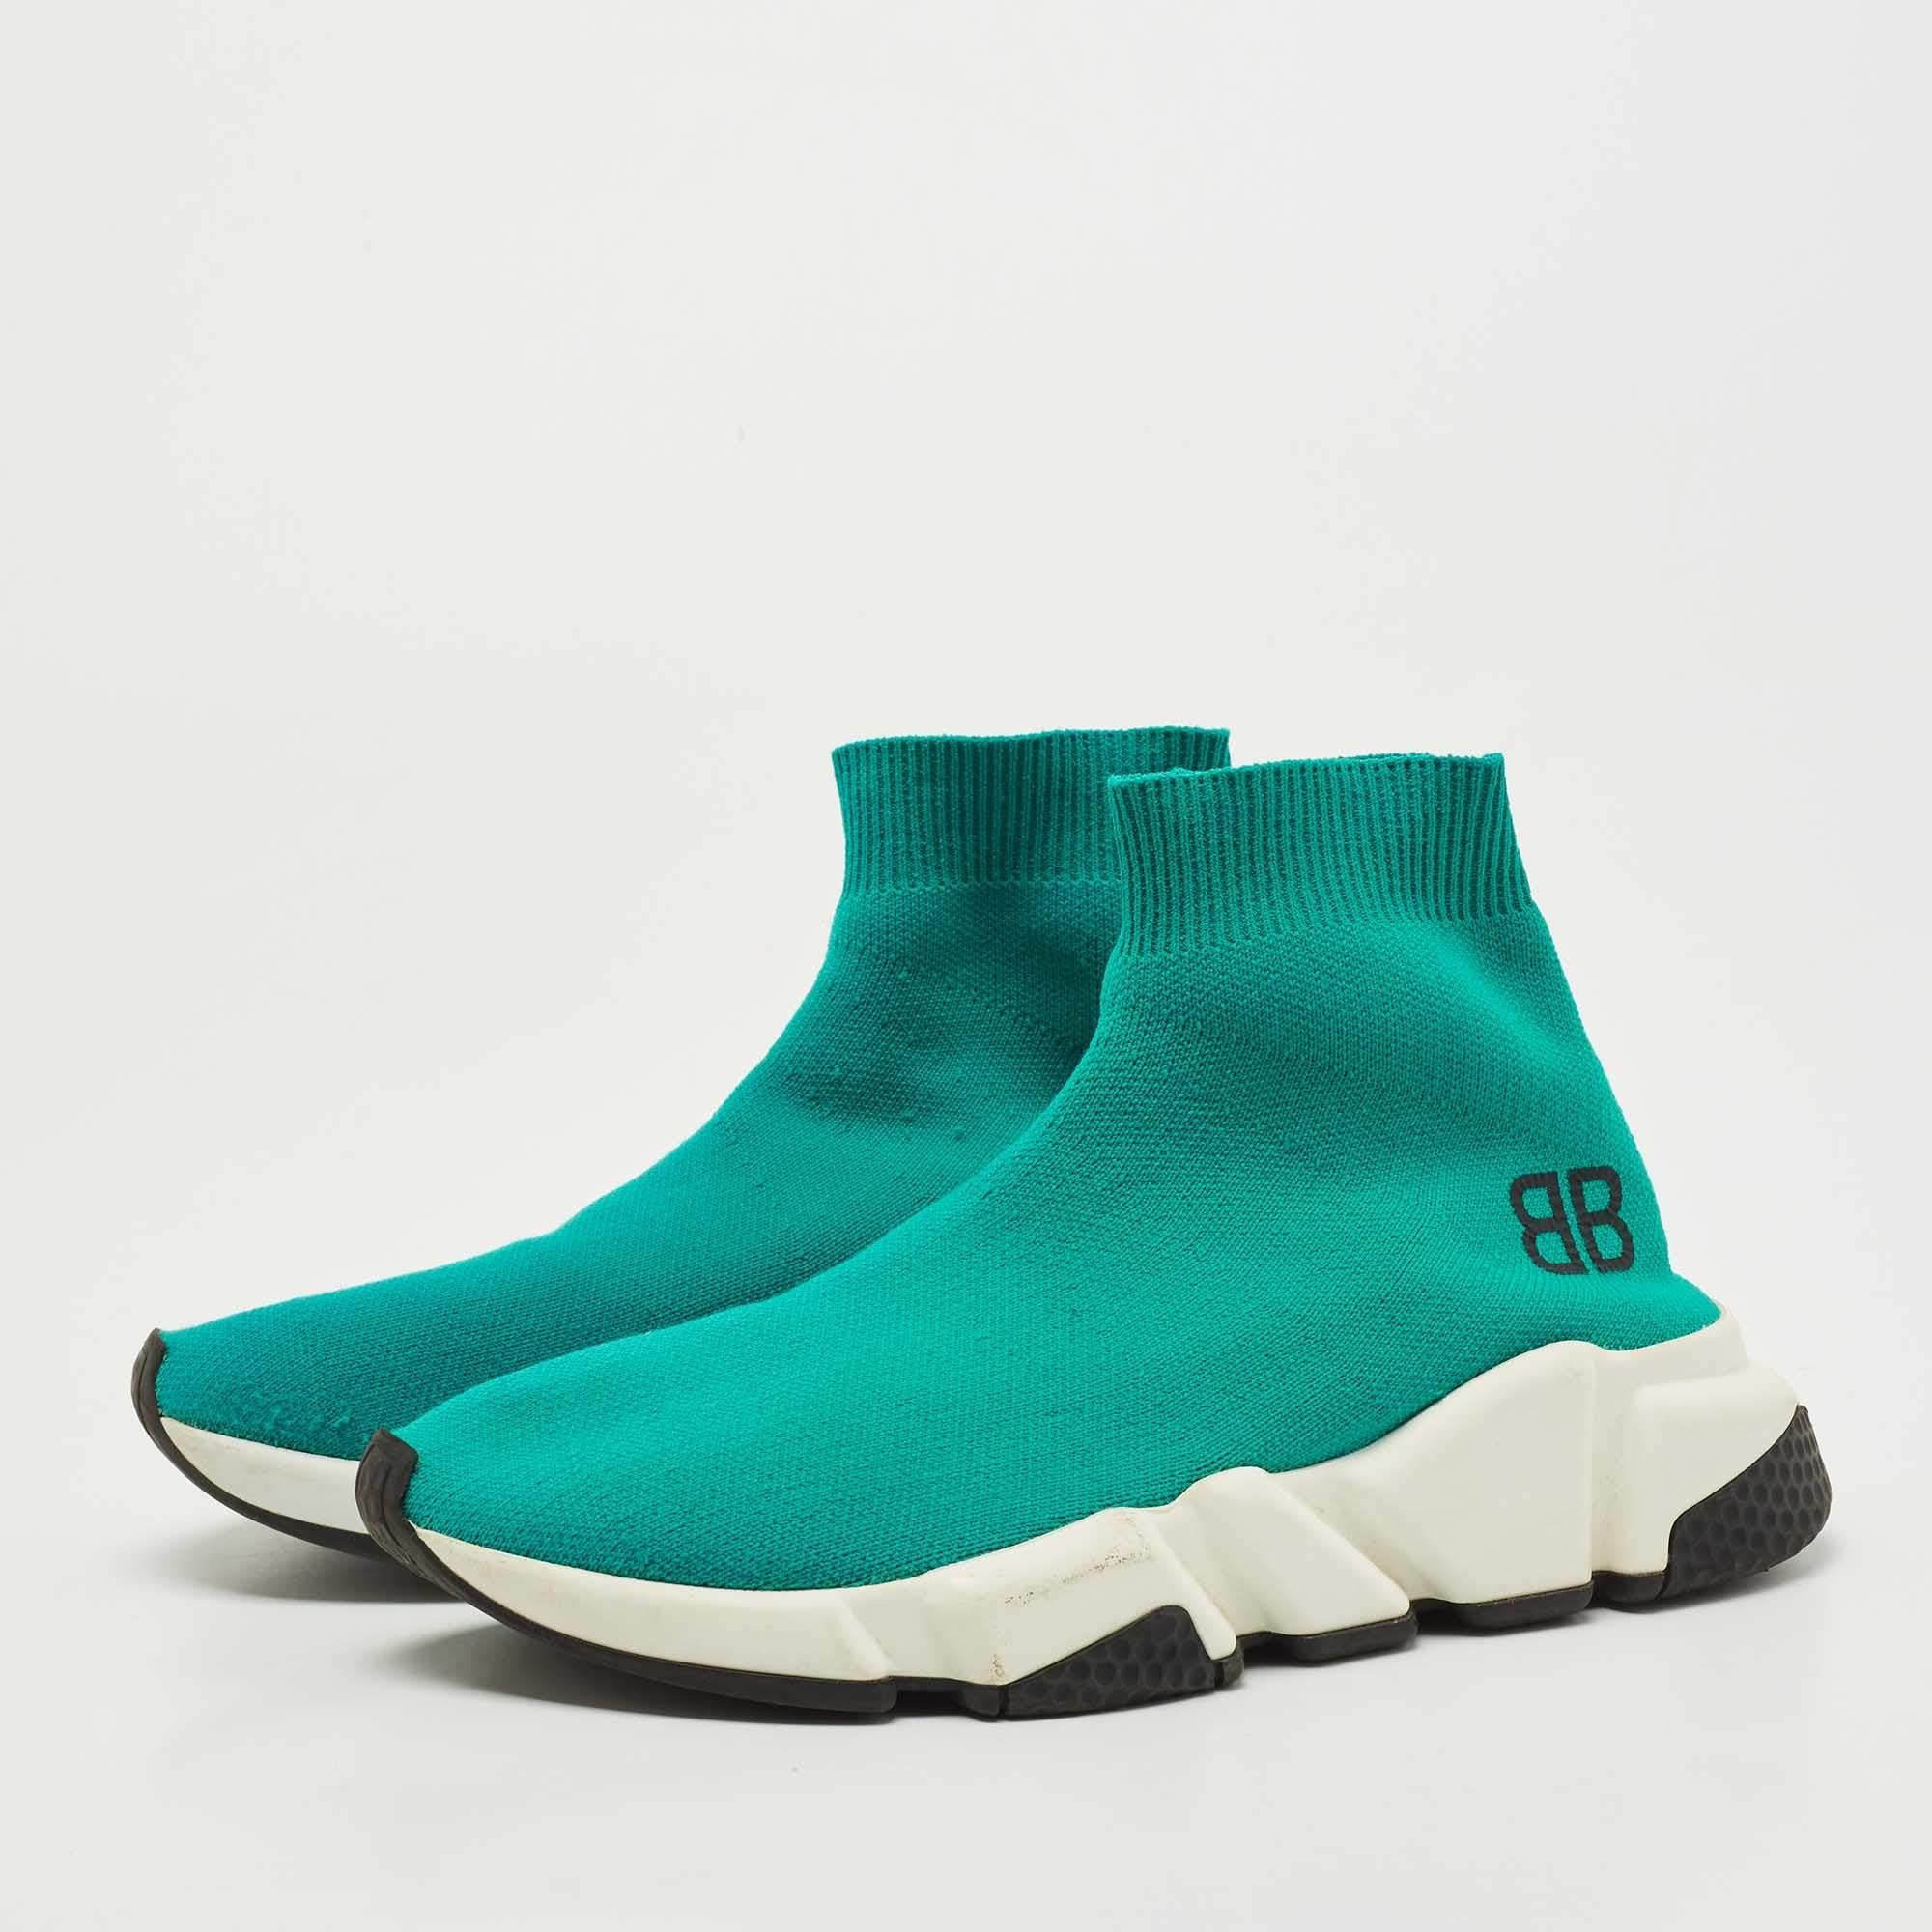 Balenciaga Turquoise Knit Fabric Speed Trainer Sneakers Size 35 In Good Condition For Sale In Dubai, Al Qouz 2